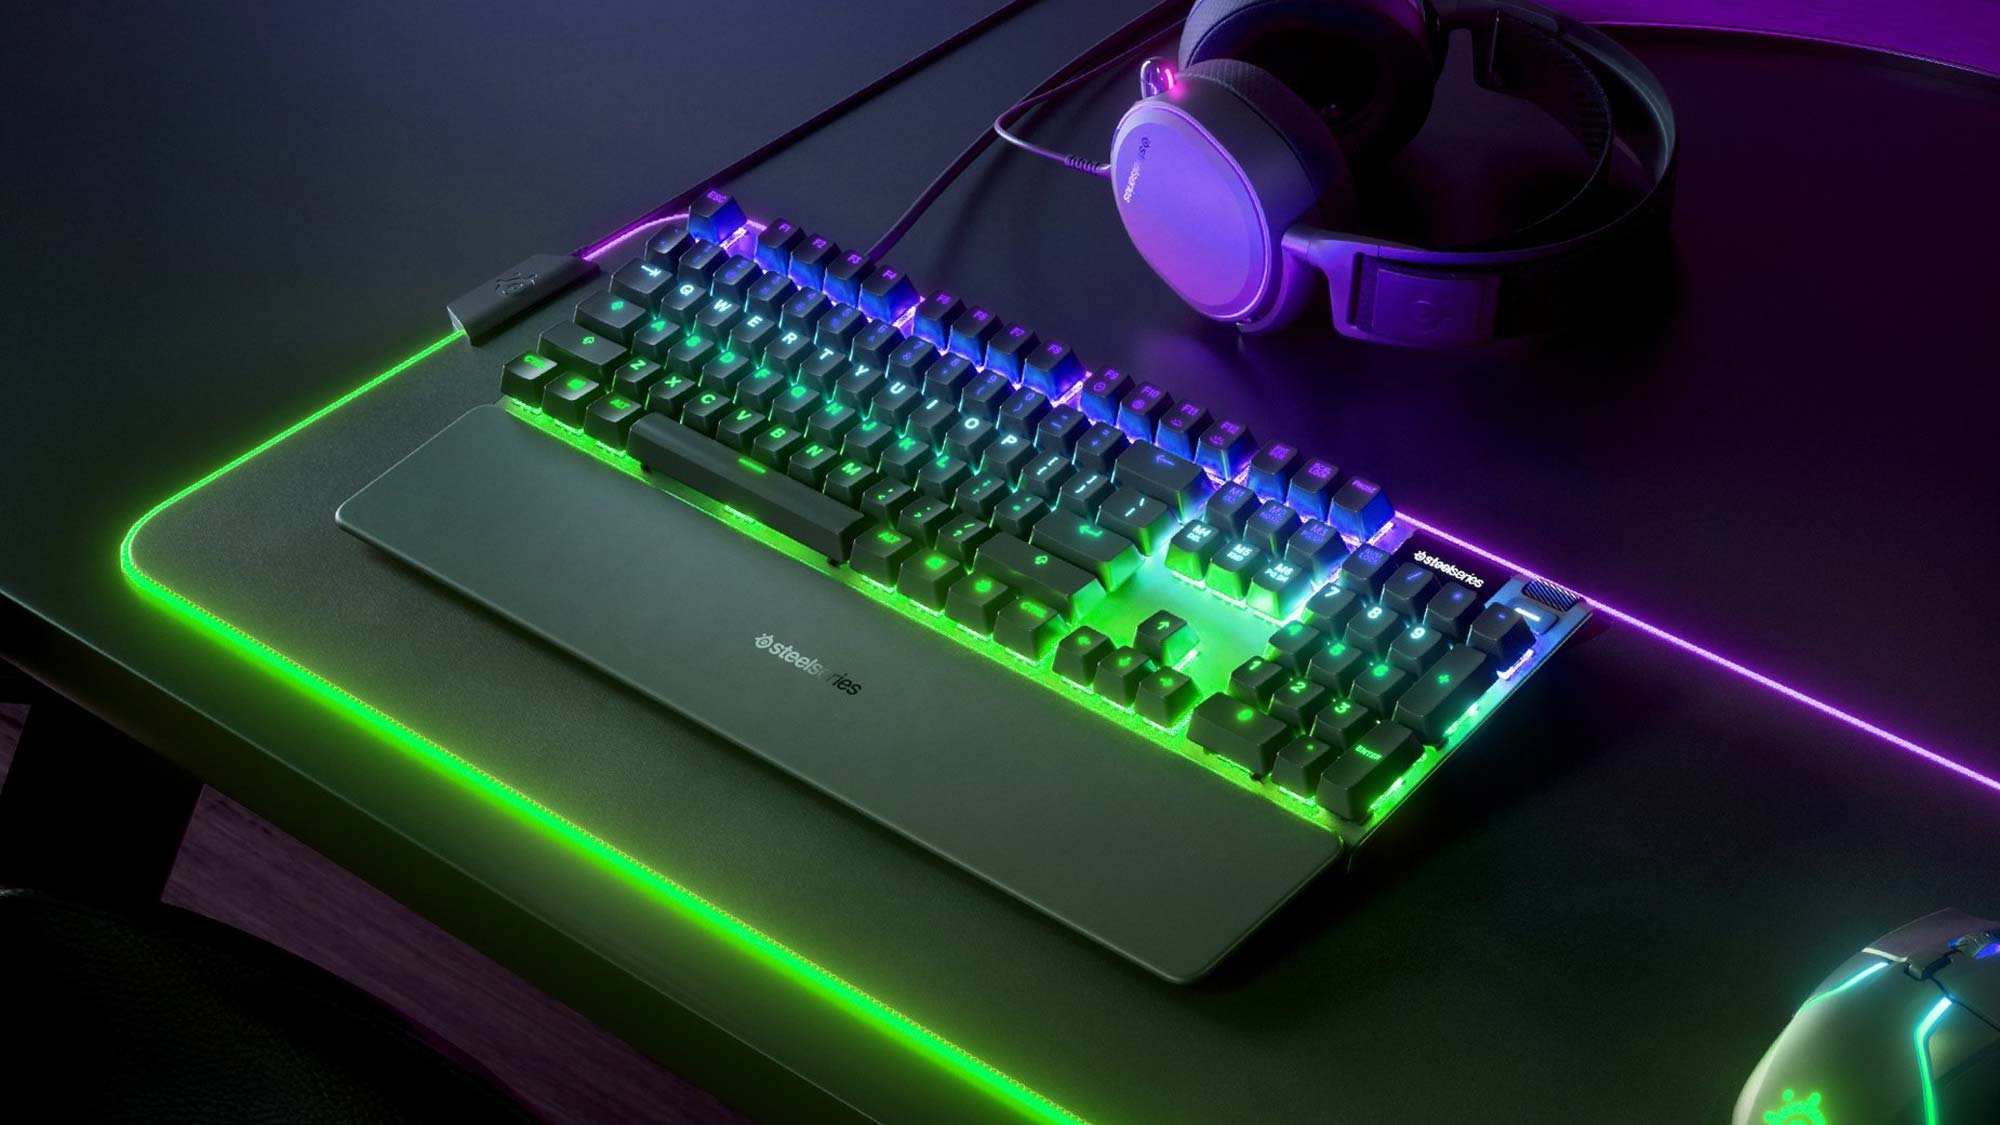 SteelSeries Apex 7 Keyboard Review: Colorful and Competent | Tom's